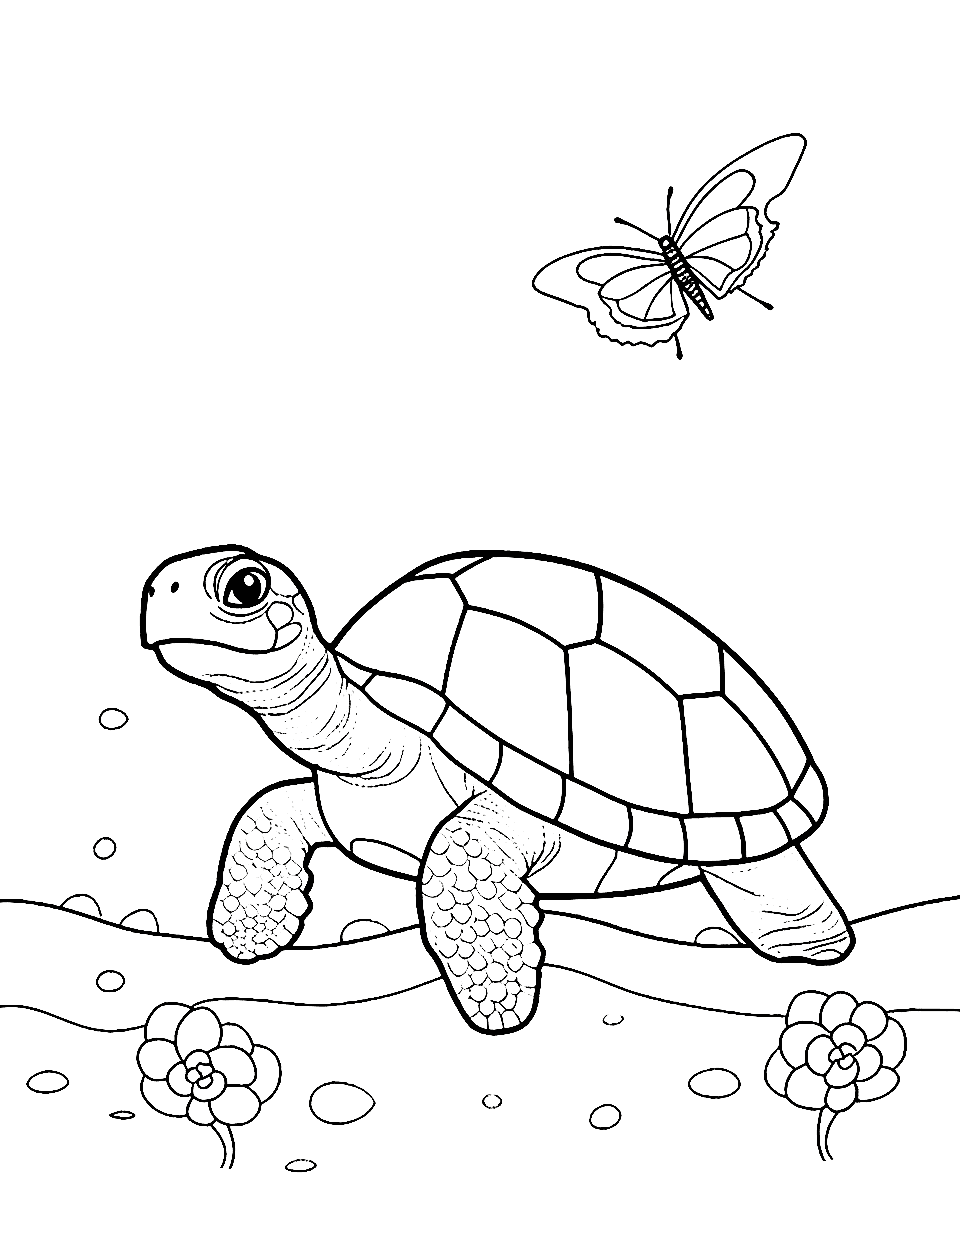 Turtle and Butterfly Coloring Page - A butterfly flying around a turtle creating a serene moment.